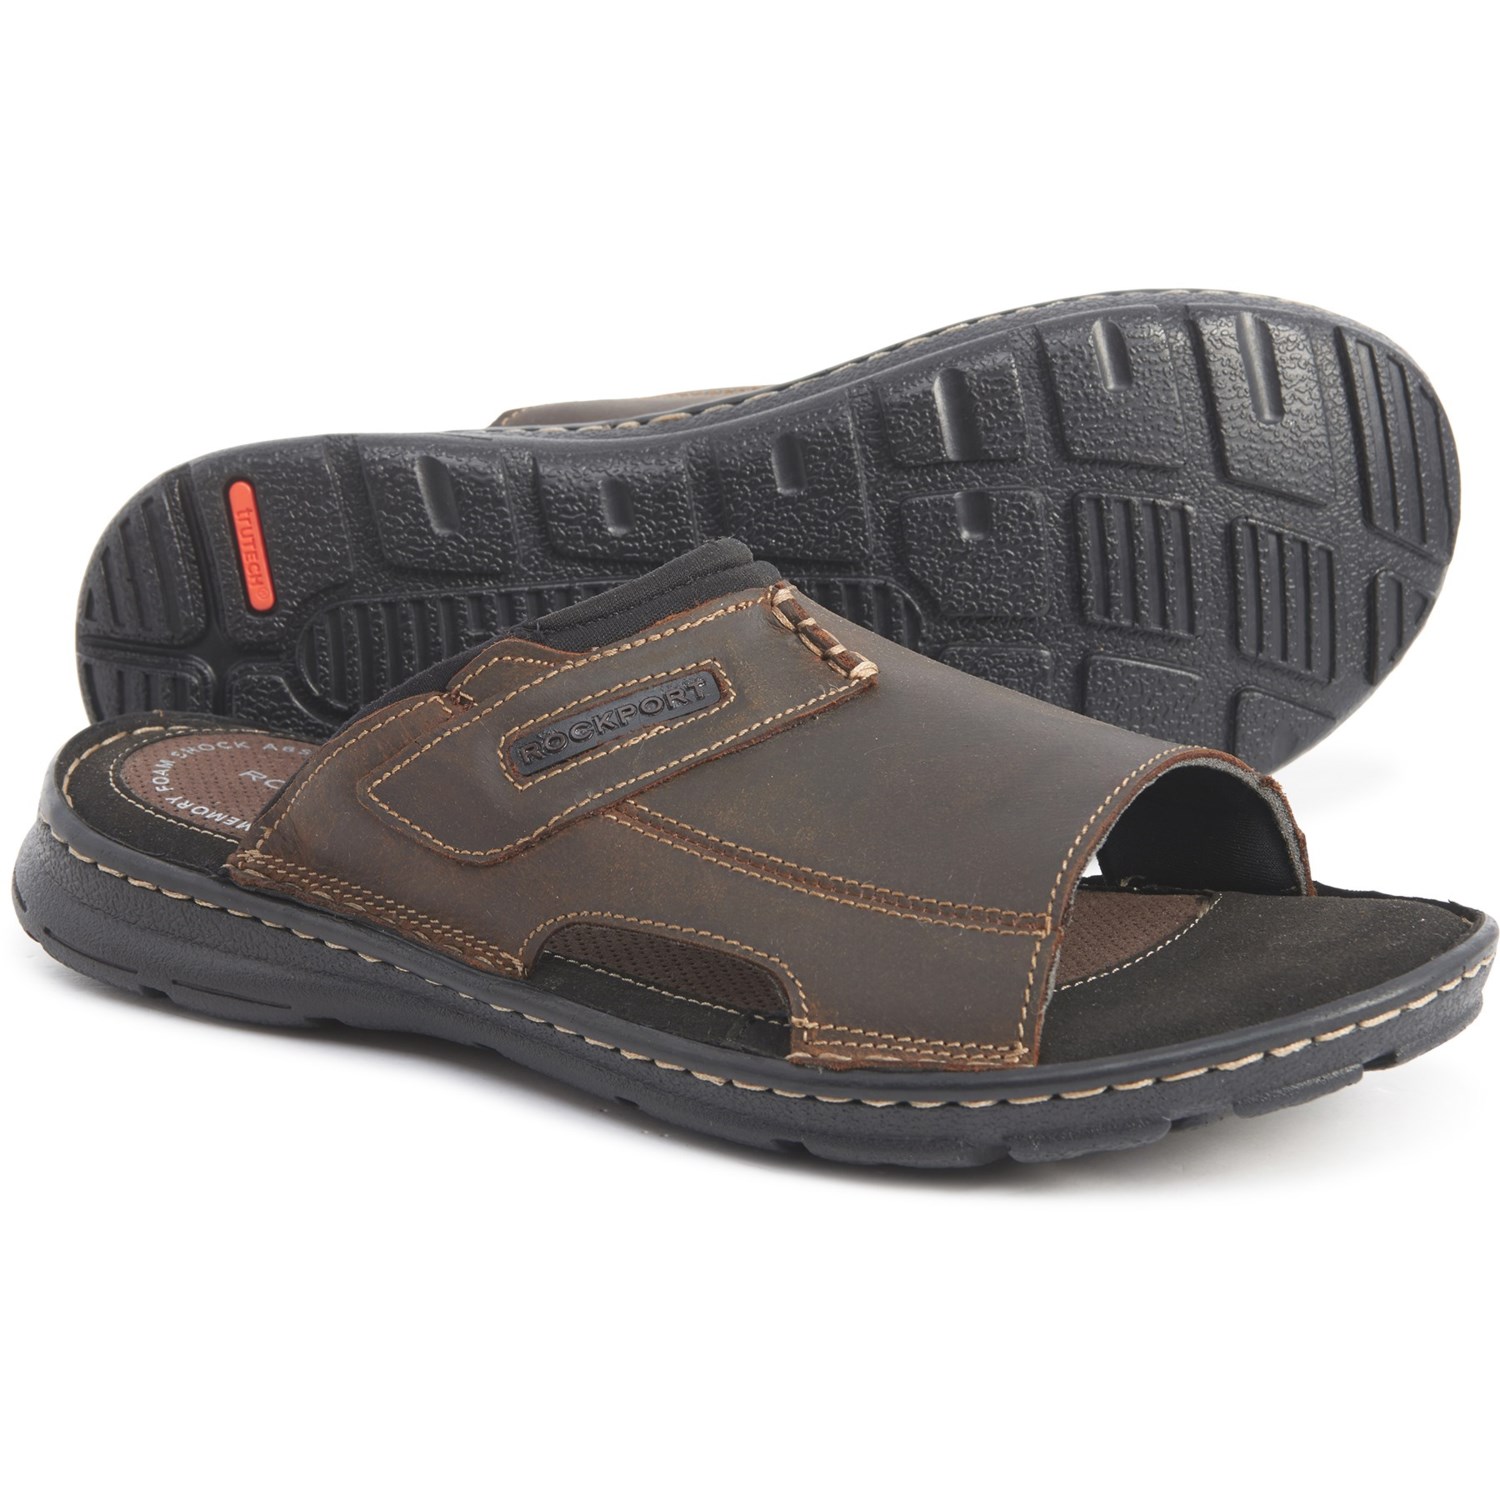 Rockport Men's Sandals Leather, Buy Now, Clearance, 51% OFF, lifogheil ...